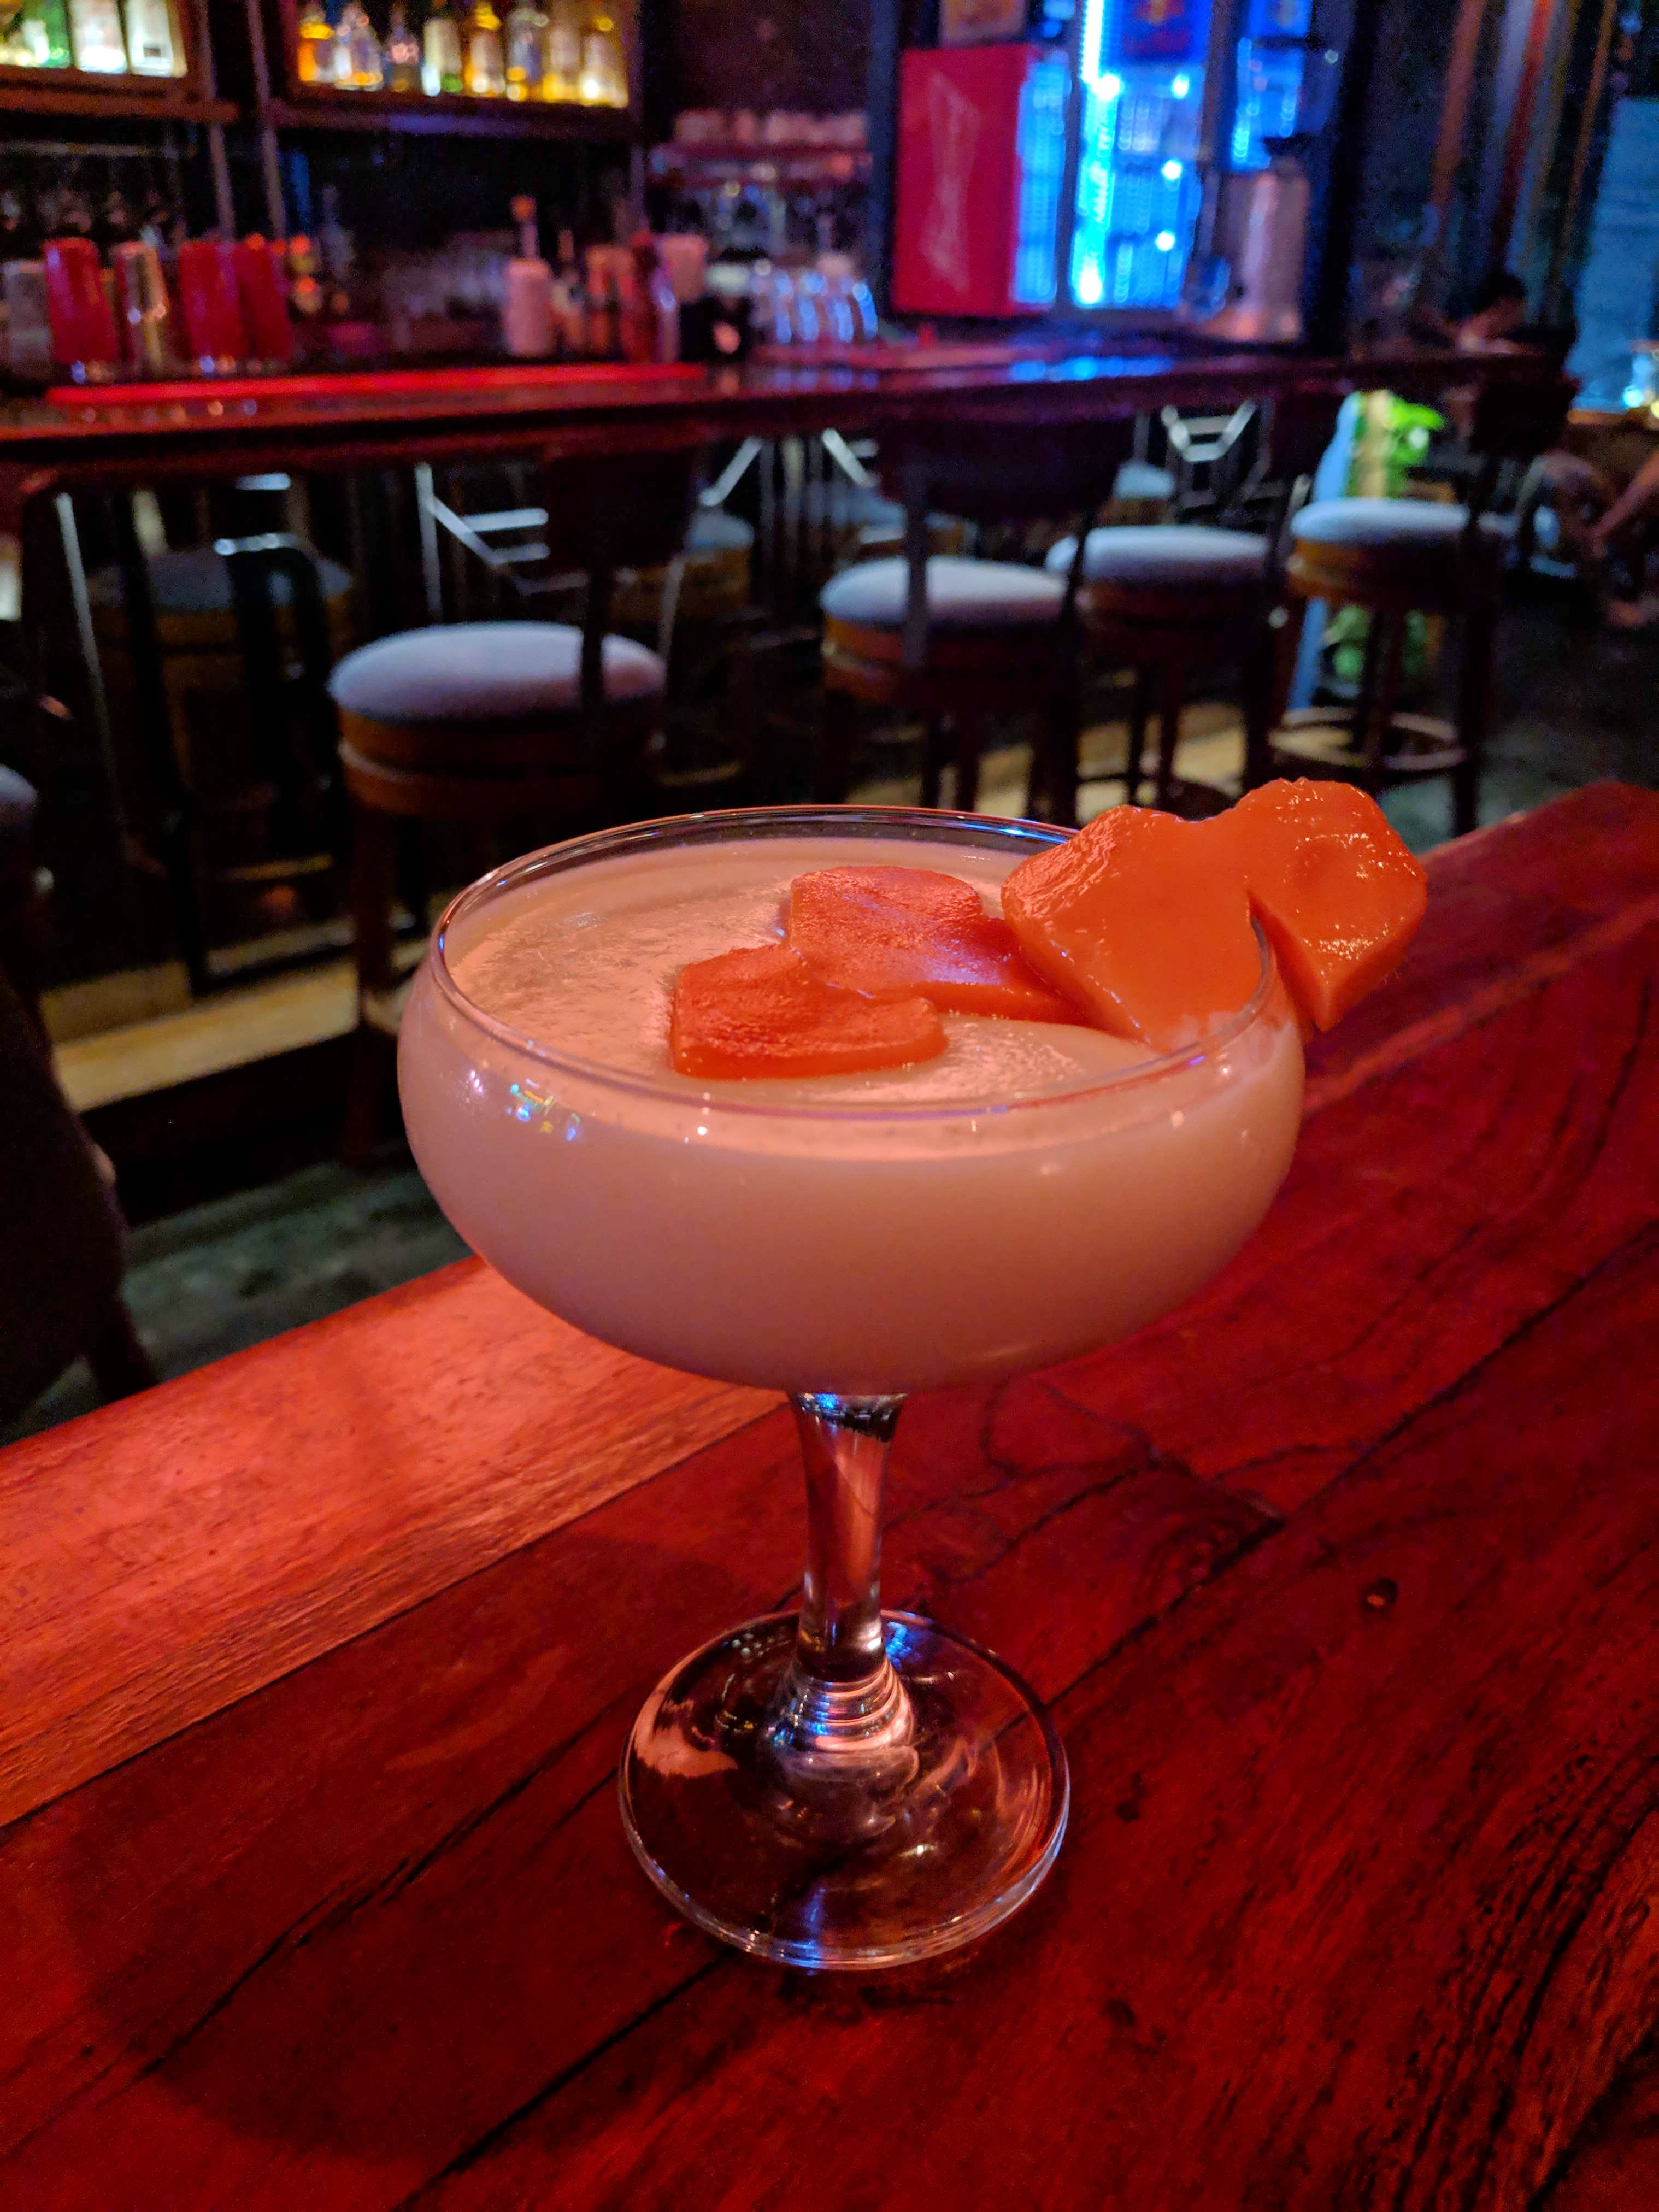 Drink,Daiquiri,Alcoholic beverage,Classic cocktail,Cosmopolitan,Cocktail,Bacardi cocktail,Pink lady,Distilled beverage,Bar